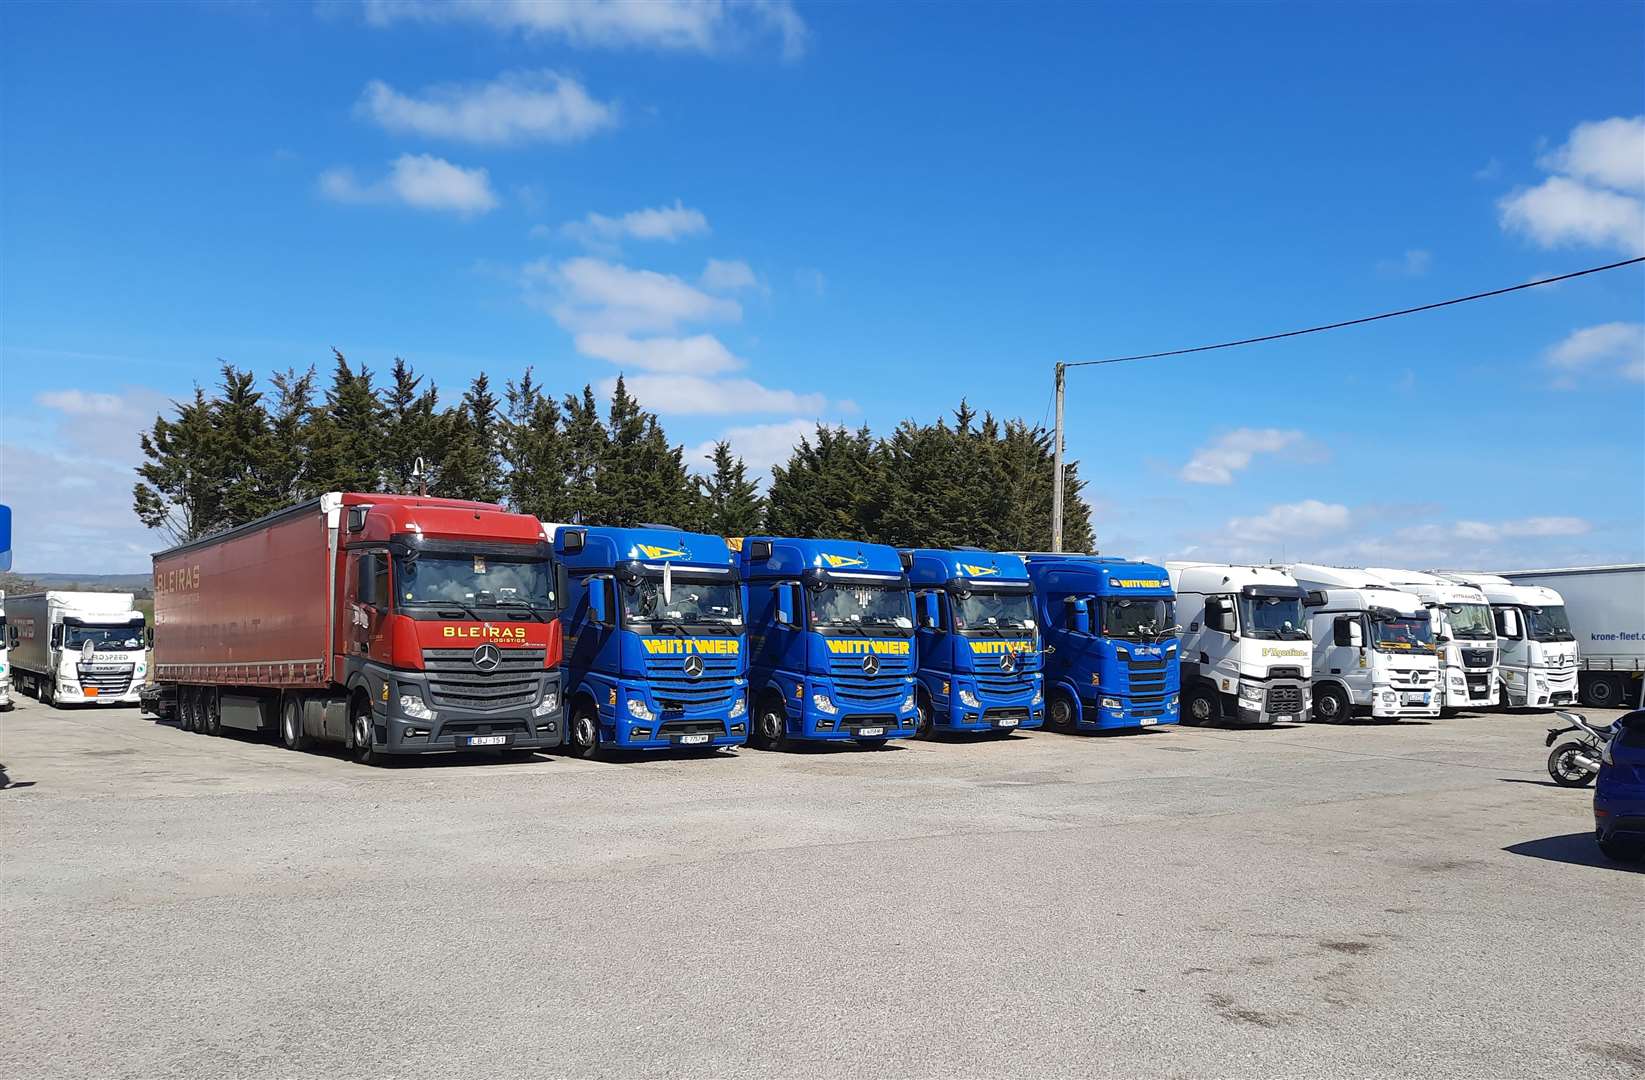 The rows of lorries parked outside the Airport Café near Ashford